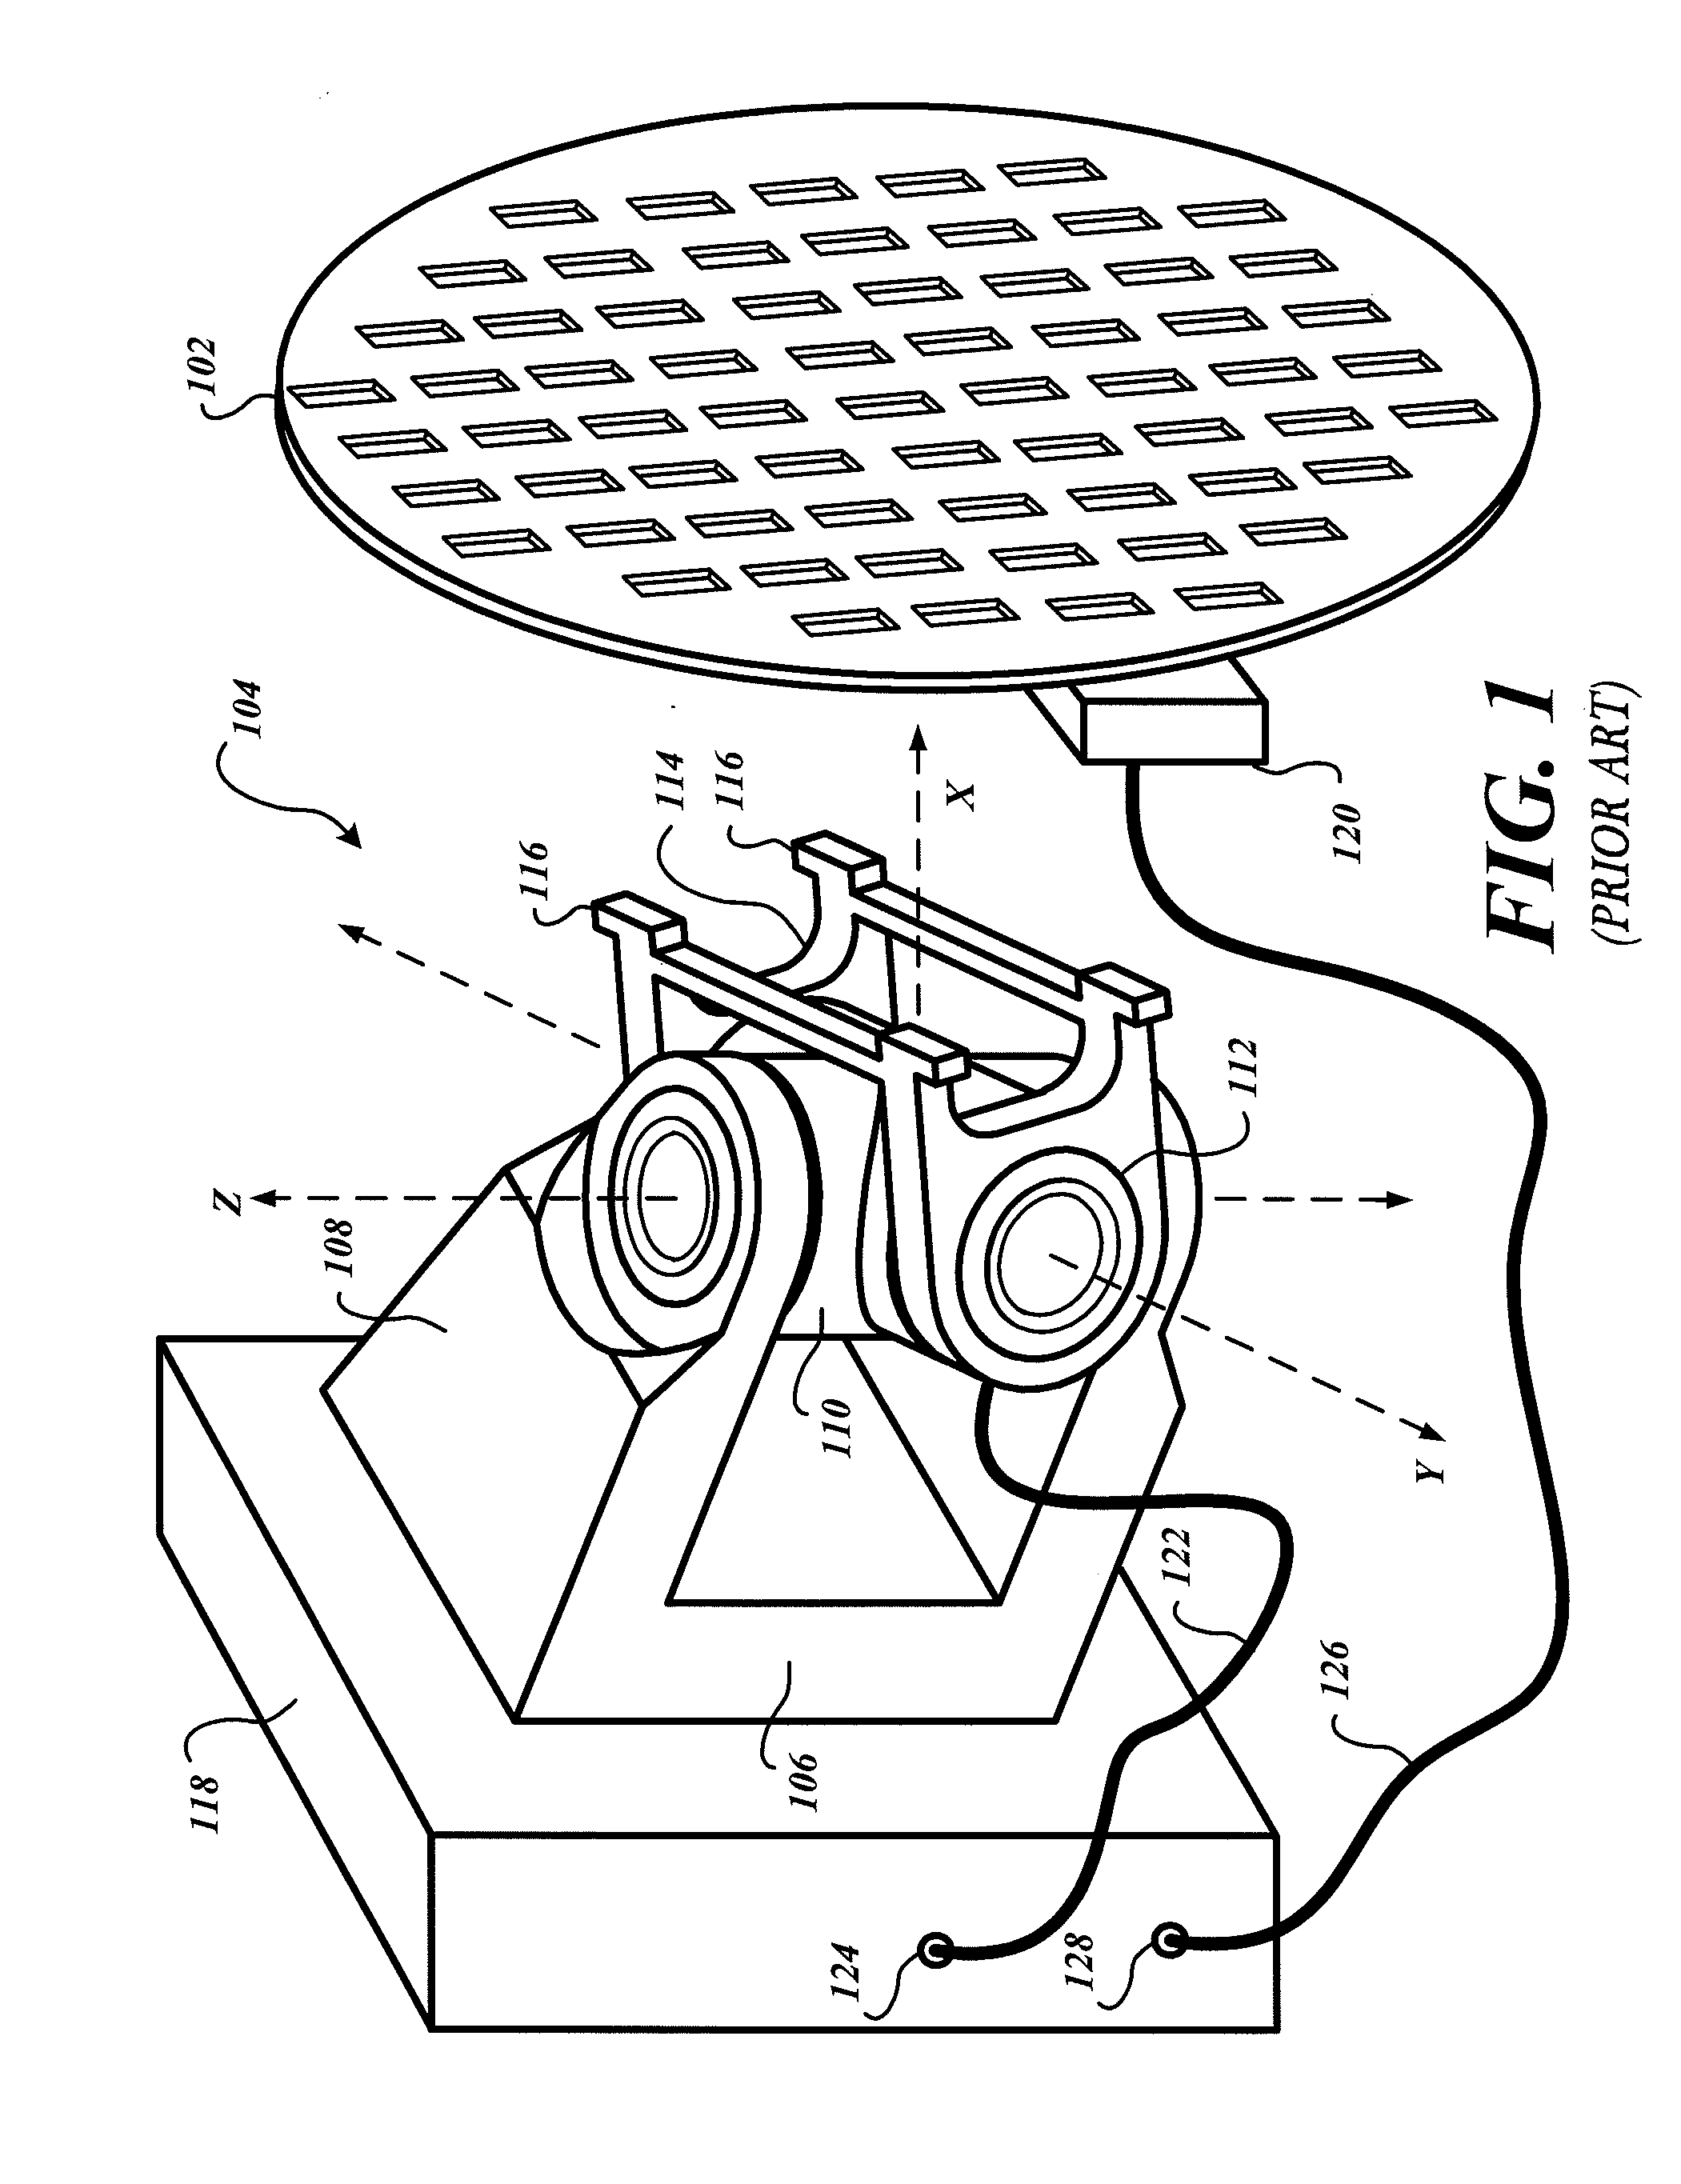 Systems and methods for powering a gimbal mounted device